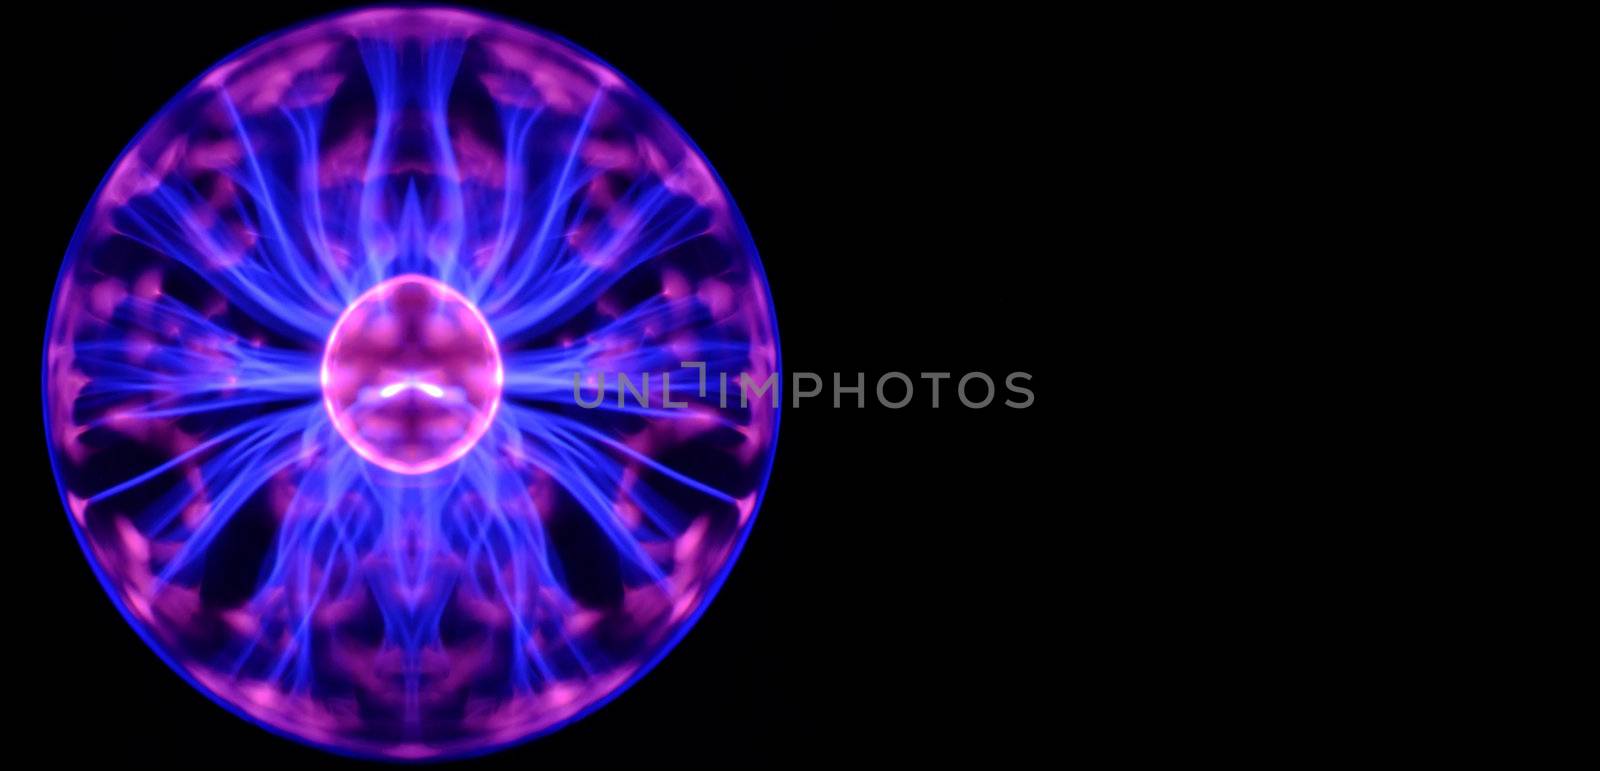 Electric Orchestra by PhotoWorks